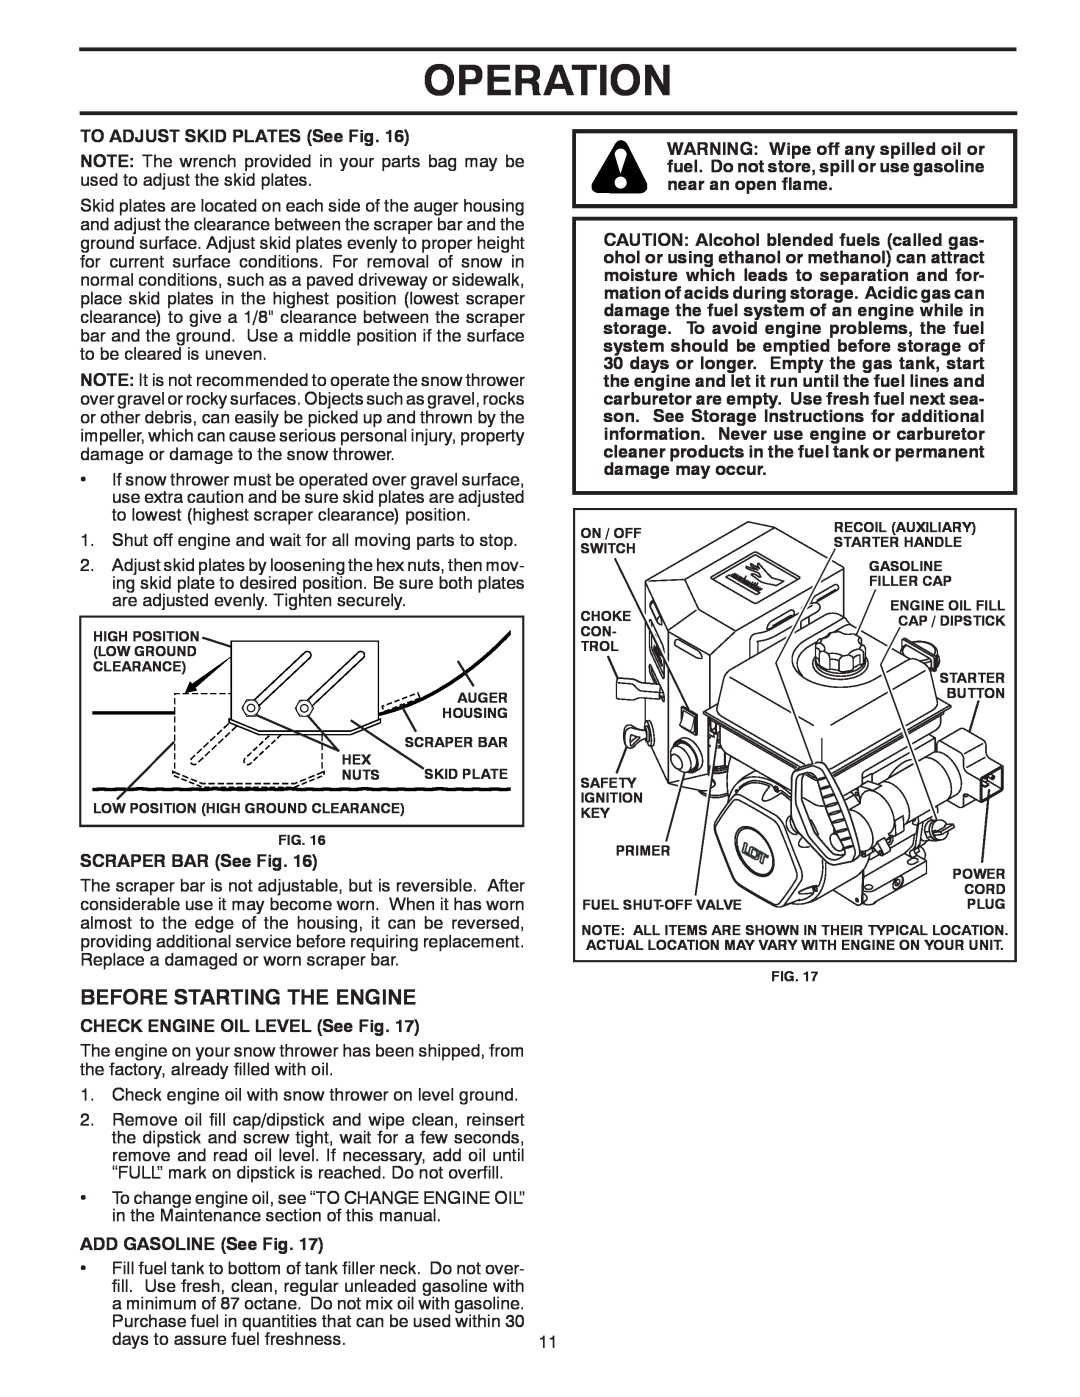 Poulan 424003 Before Starting The Engine, Operation, TO ADJUST SKID PLATES See Fig, WARNING Wipe off any spilled oil or 